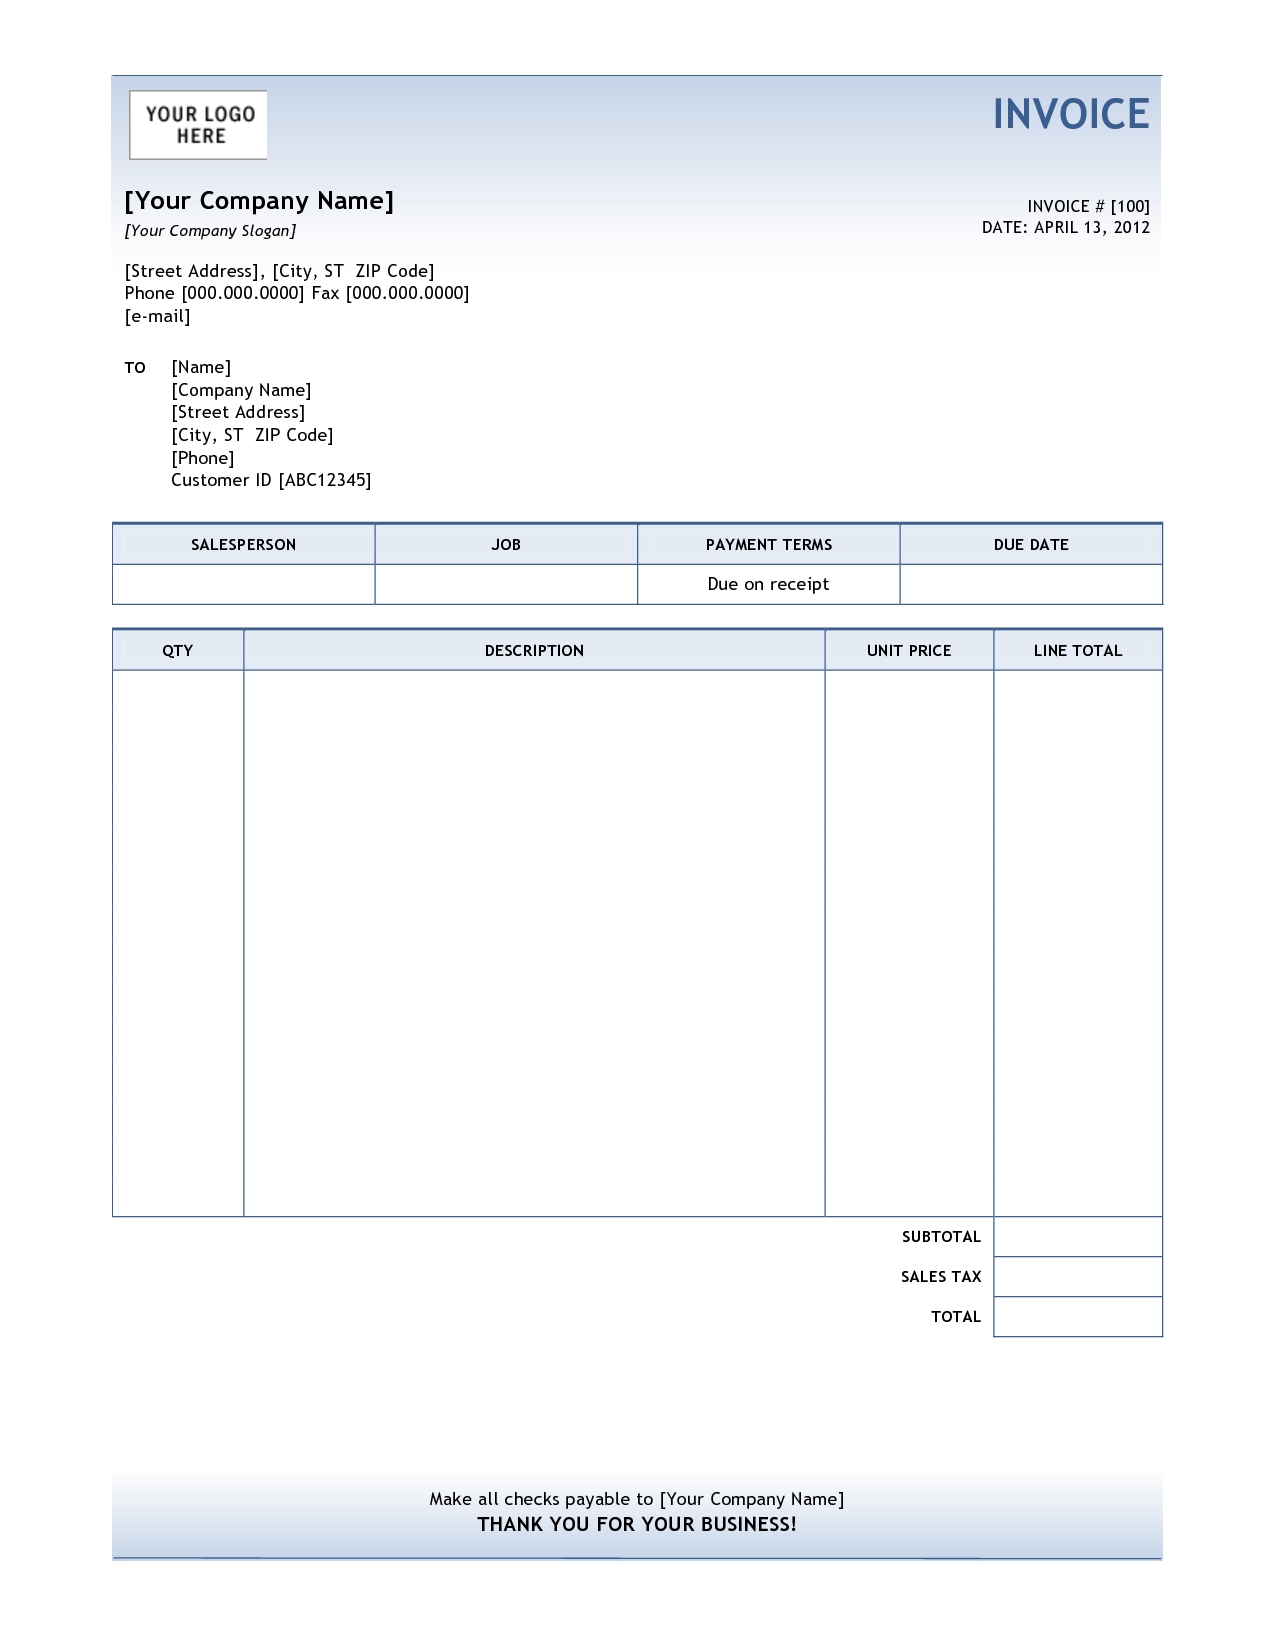 invoice format in word file 10 examples and the information in sales invoice sample word 1275 X 1650